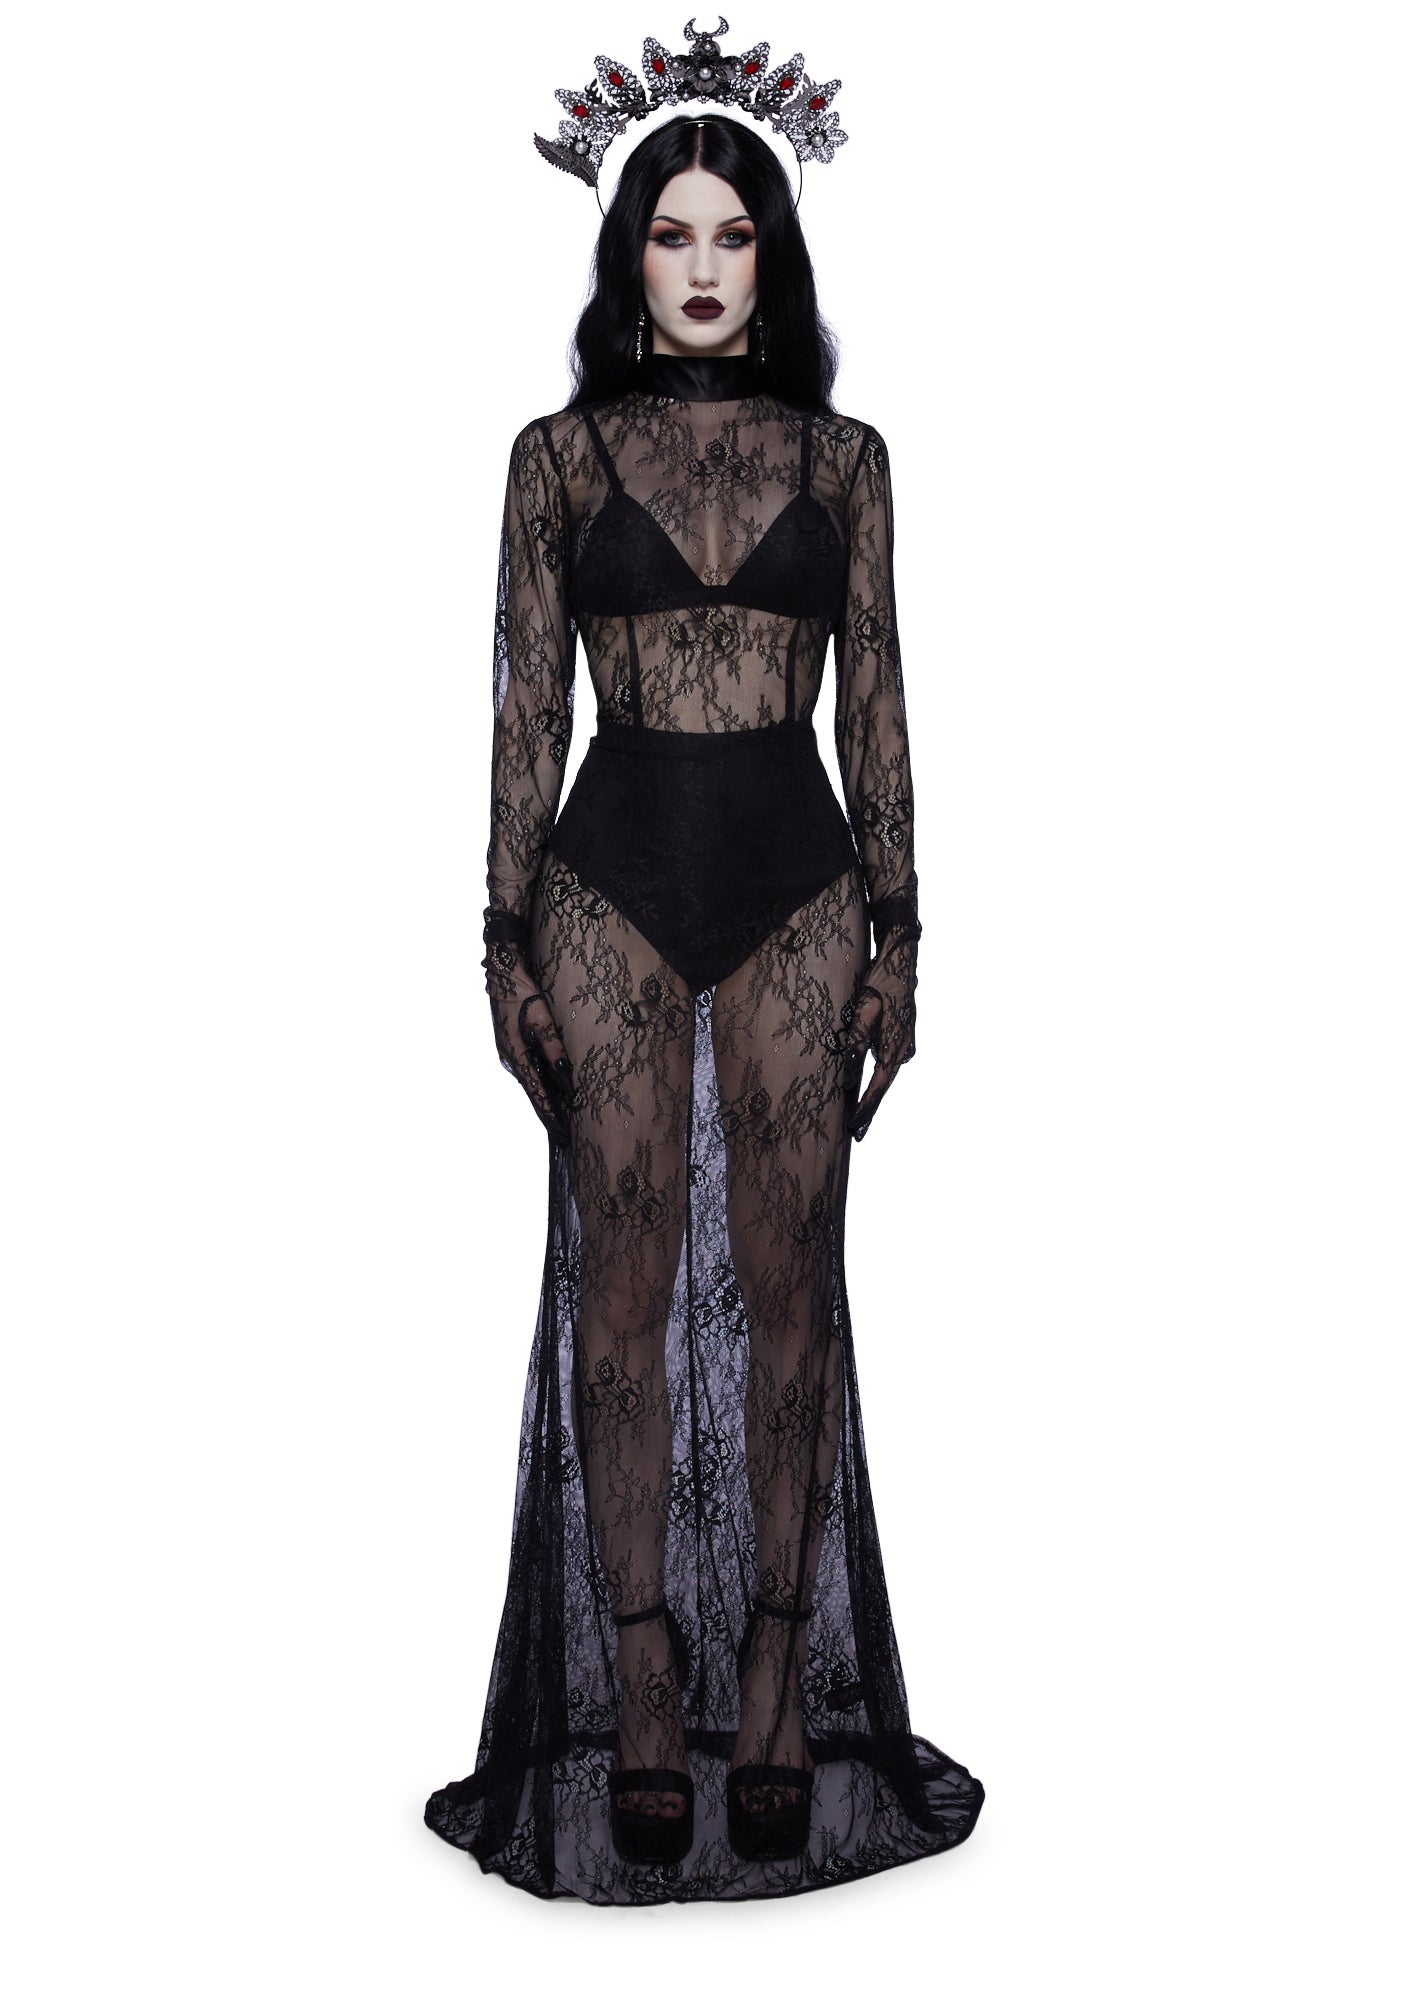 Goth Rave Outfits & Clothing for Festivals – Dolls Kill